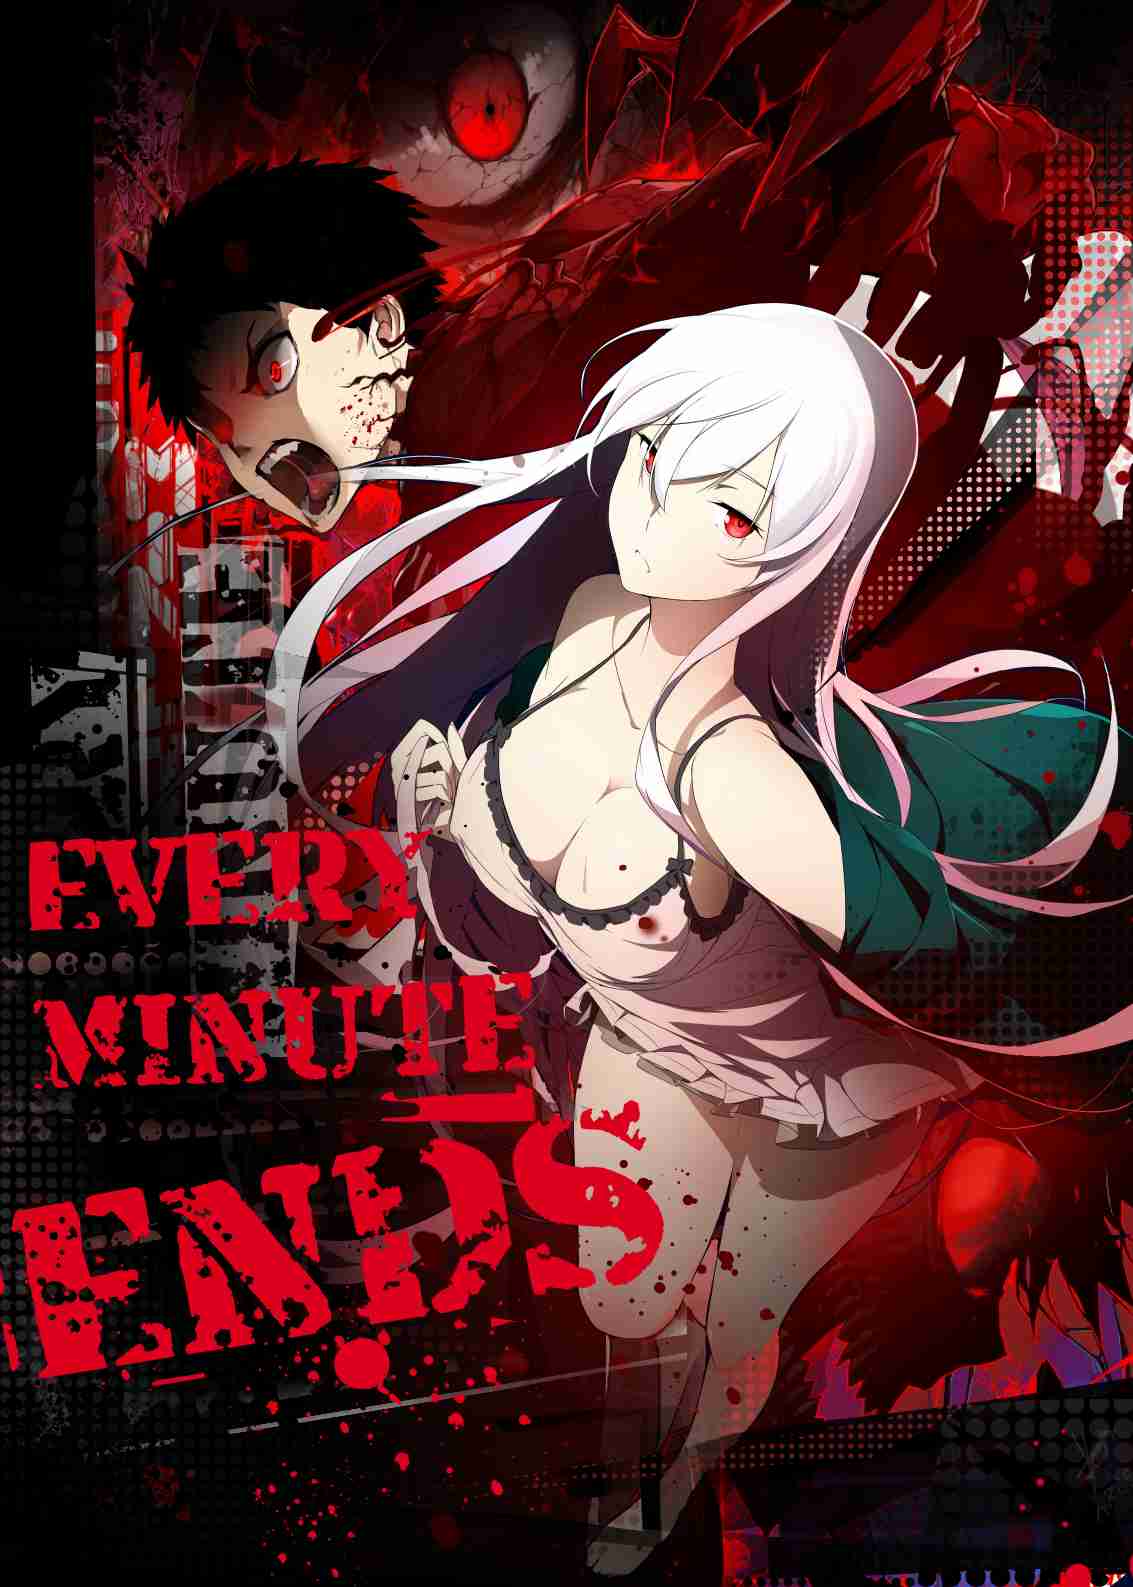 Every Minute Ends Ch. 11 Chapter 7